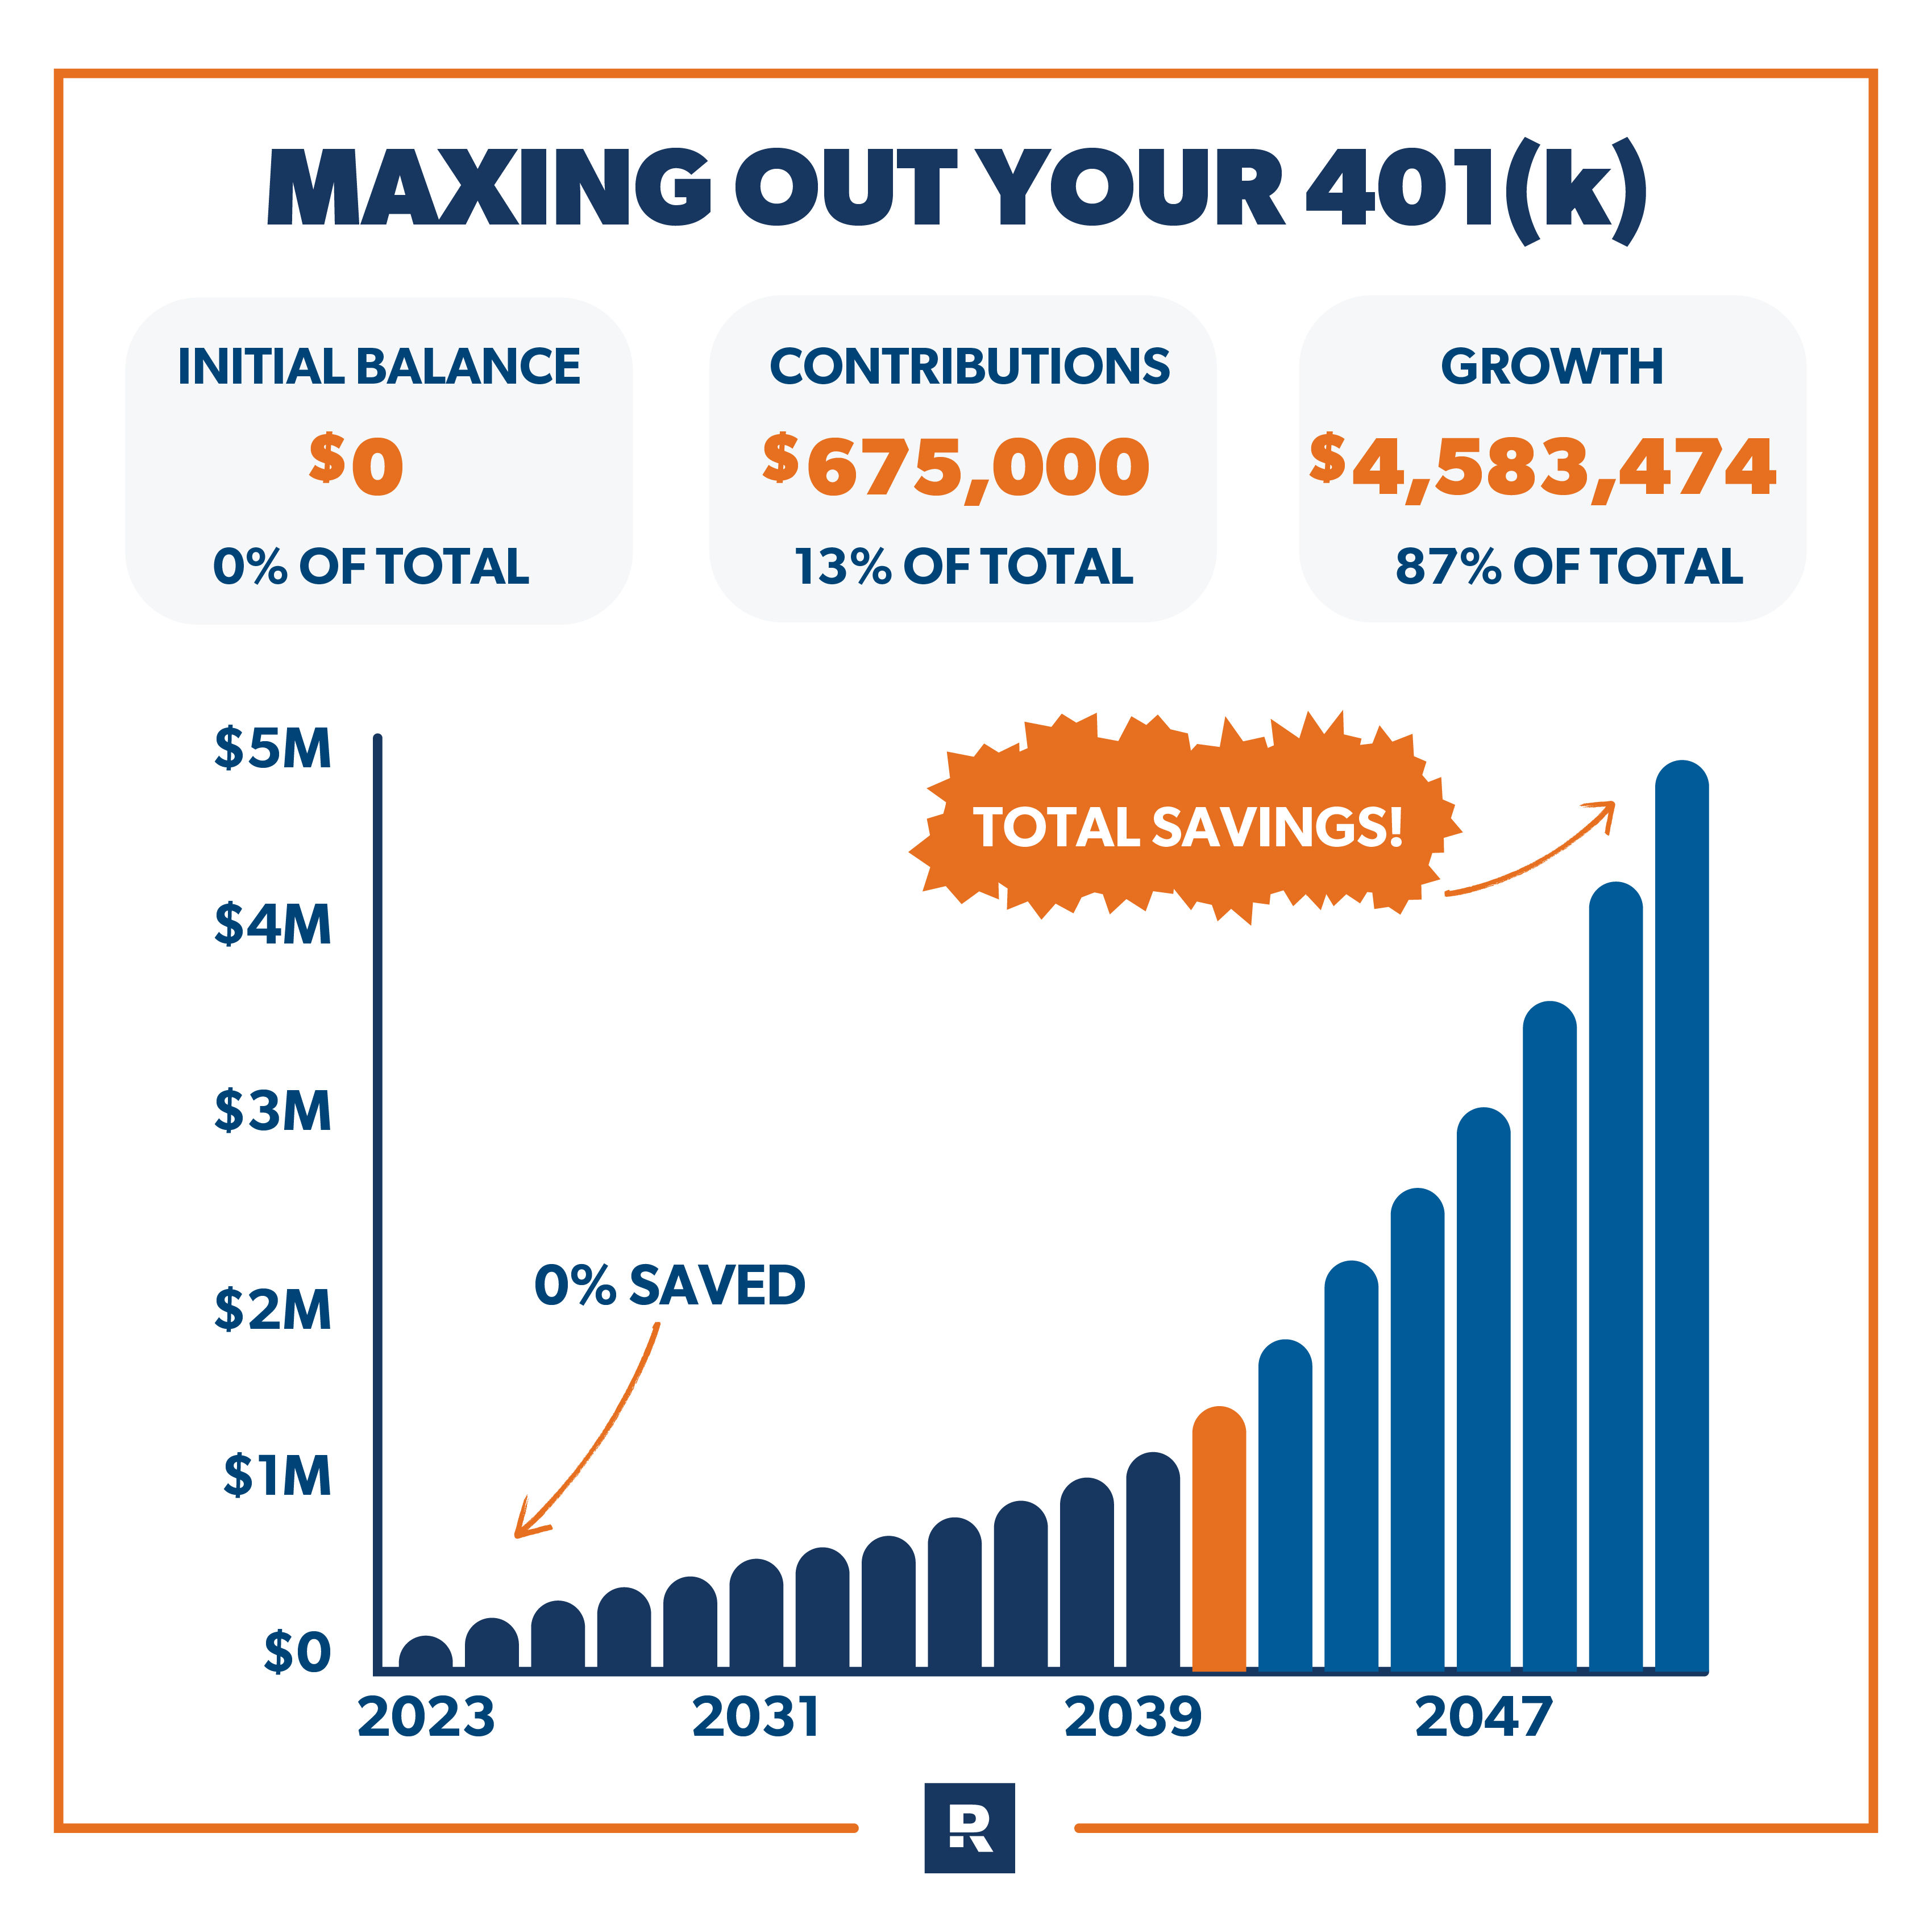 Maxing Out Your 401(k)